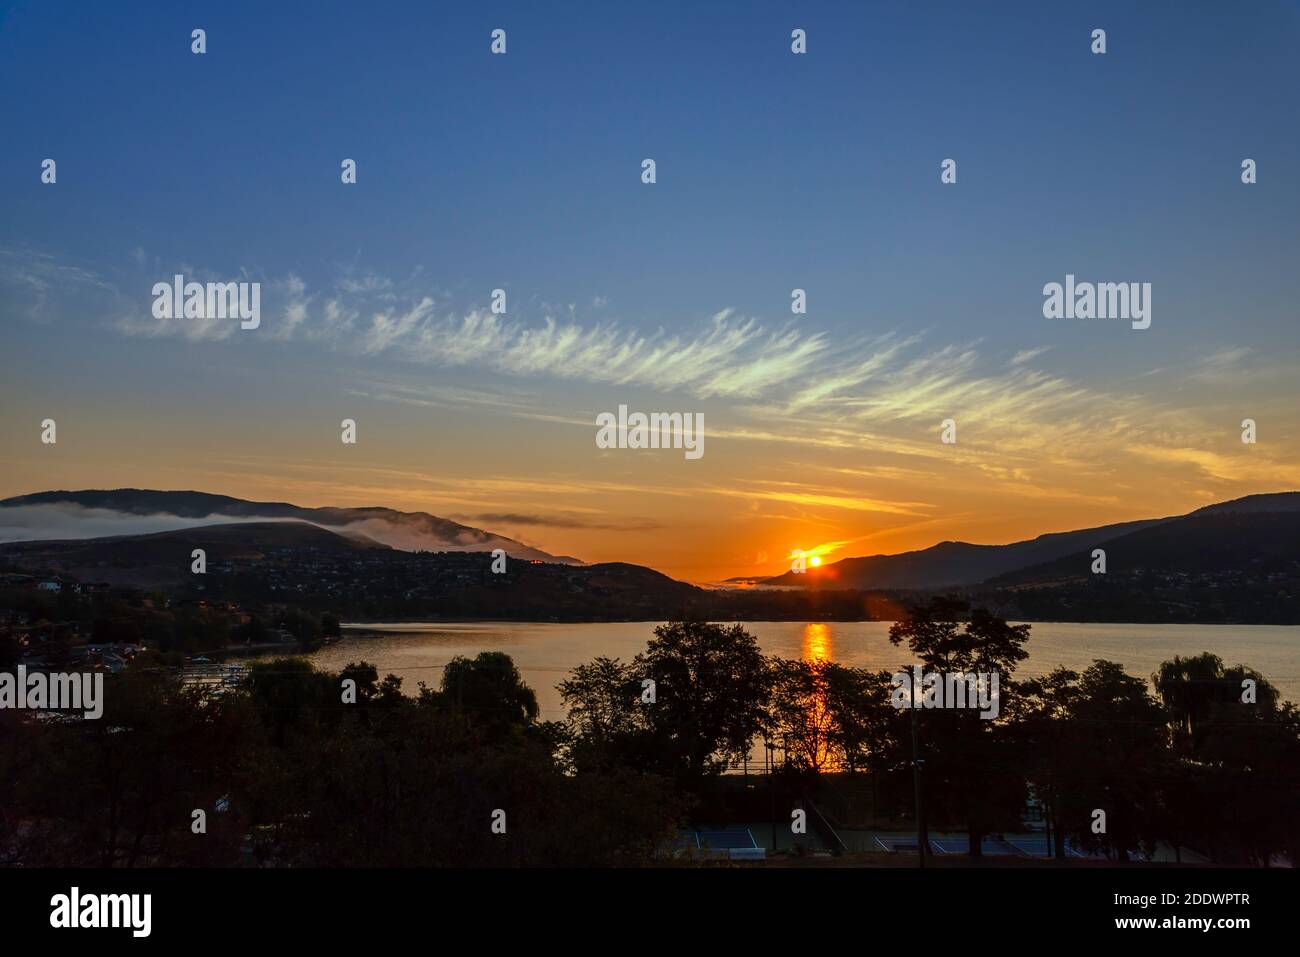 Sunrise over mountains and lake, near the coastal town. Haze of fog over the mountains, the reflection of the sun in the water, silhouettes of trees i Stock Photo